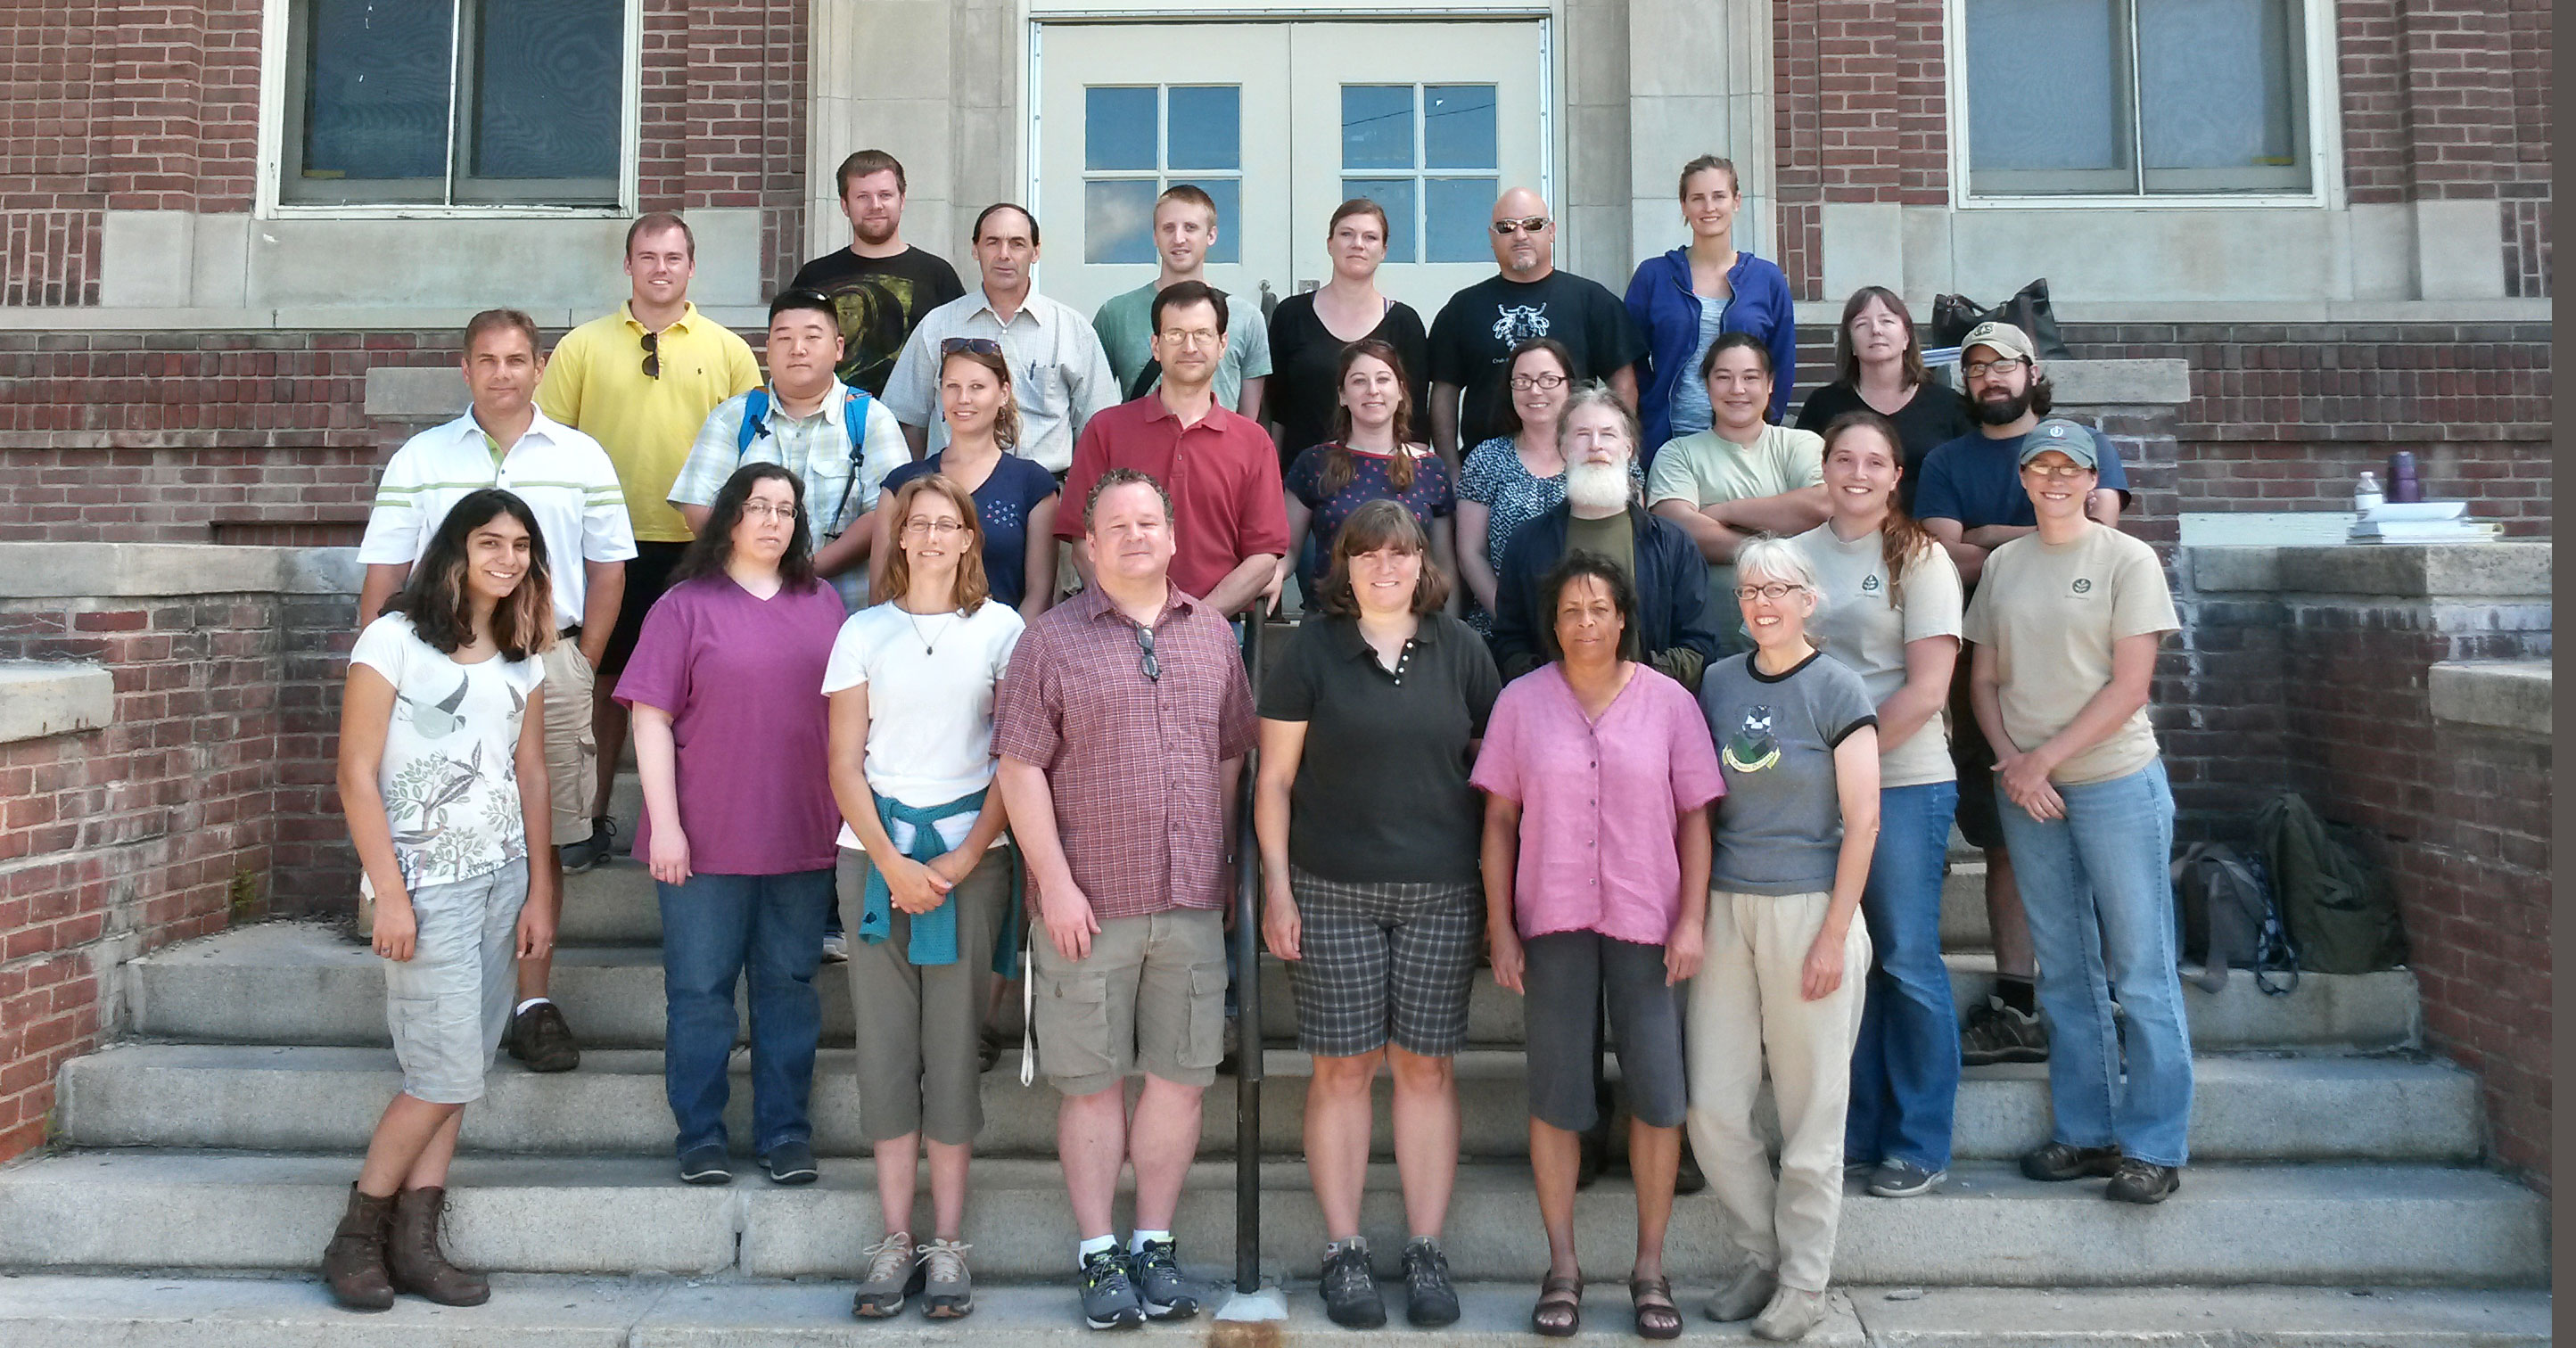 Participants and instructors of Massachusetts workshop; Gino Nearns is in the front row center, and Nathan Lord is in the back row left, in the yellow shirt. Photo courtesy Gino Nearns.